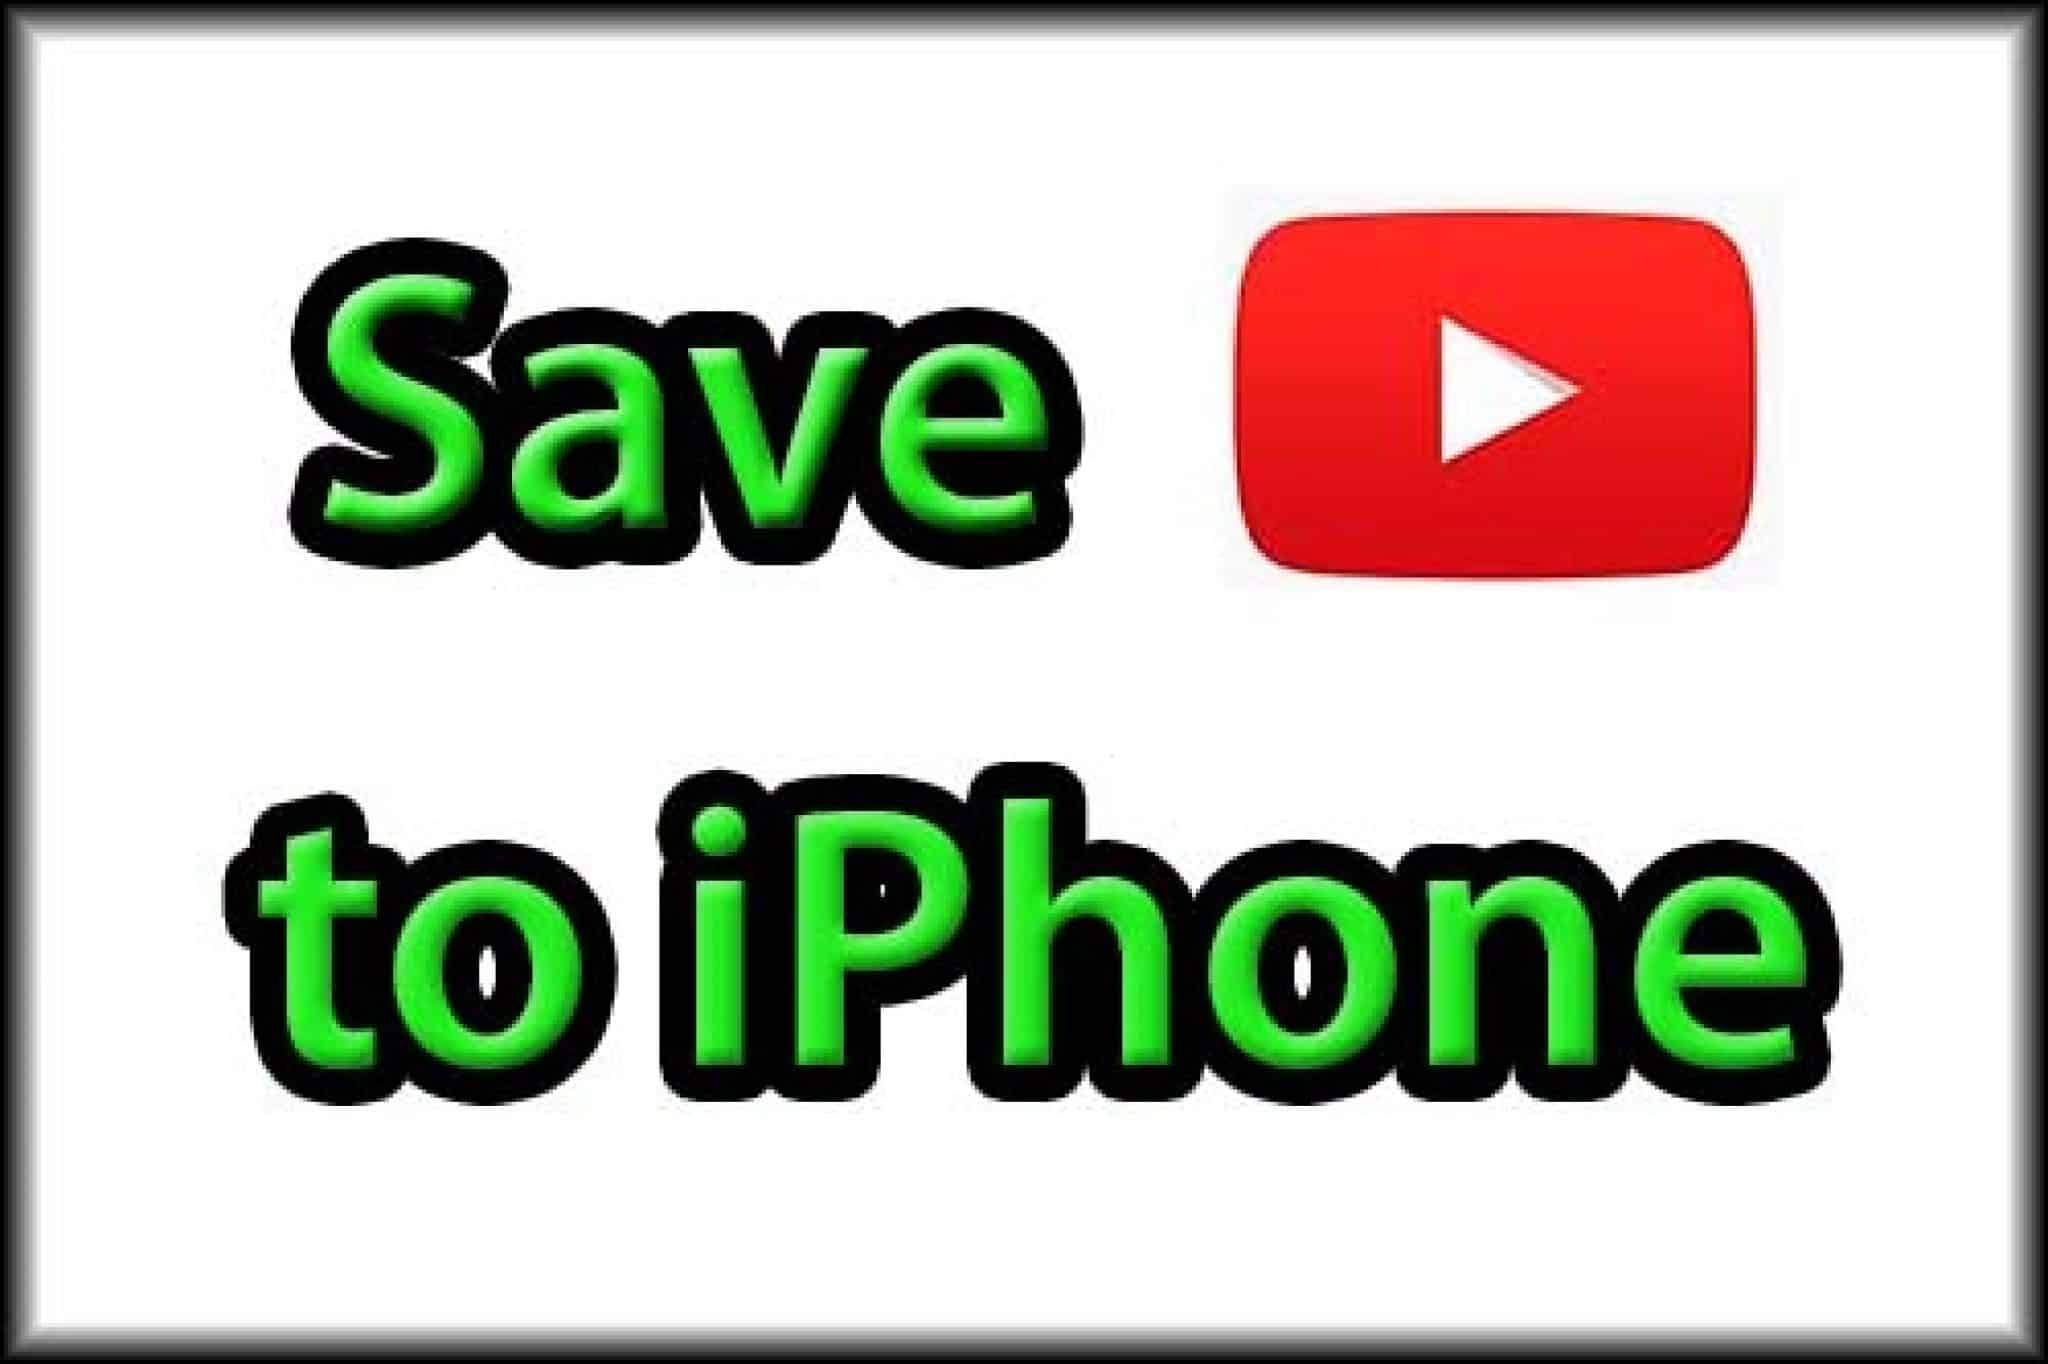 save youtube video to iphone